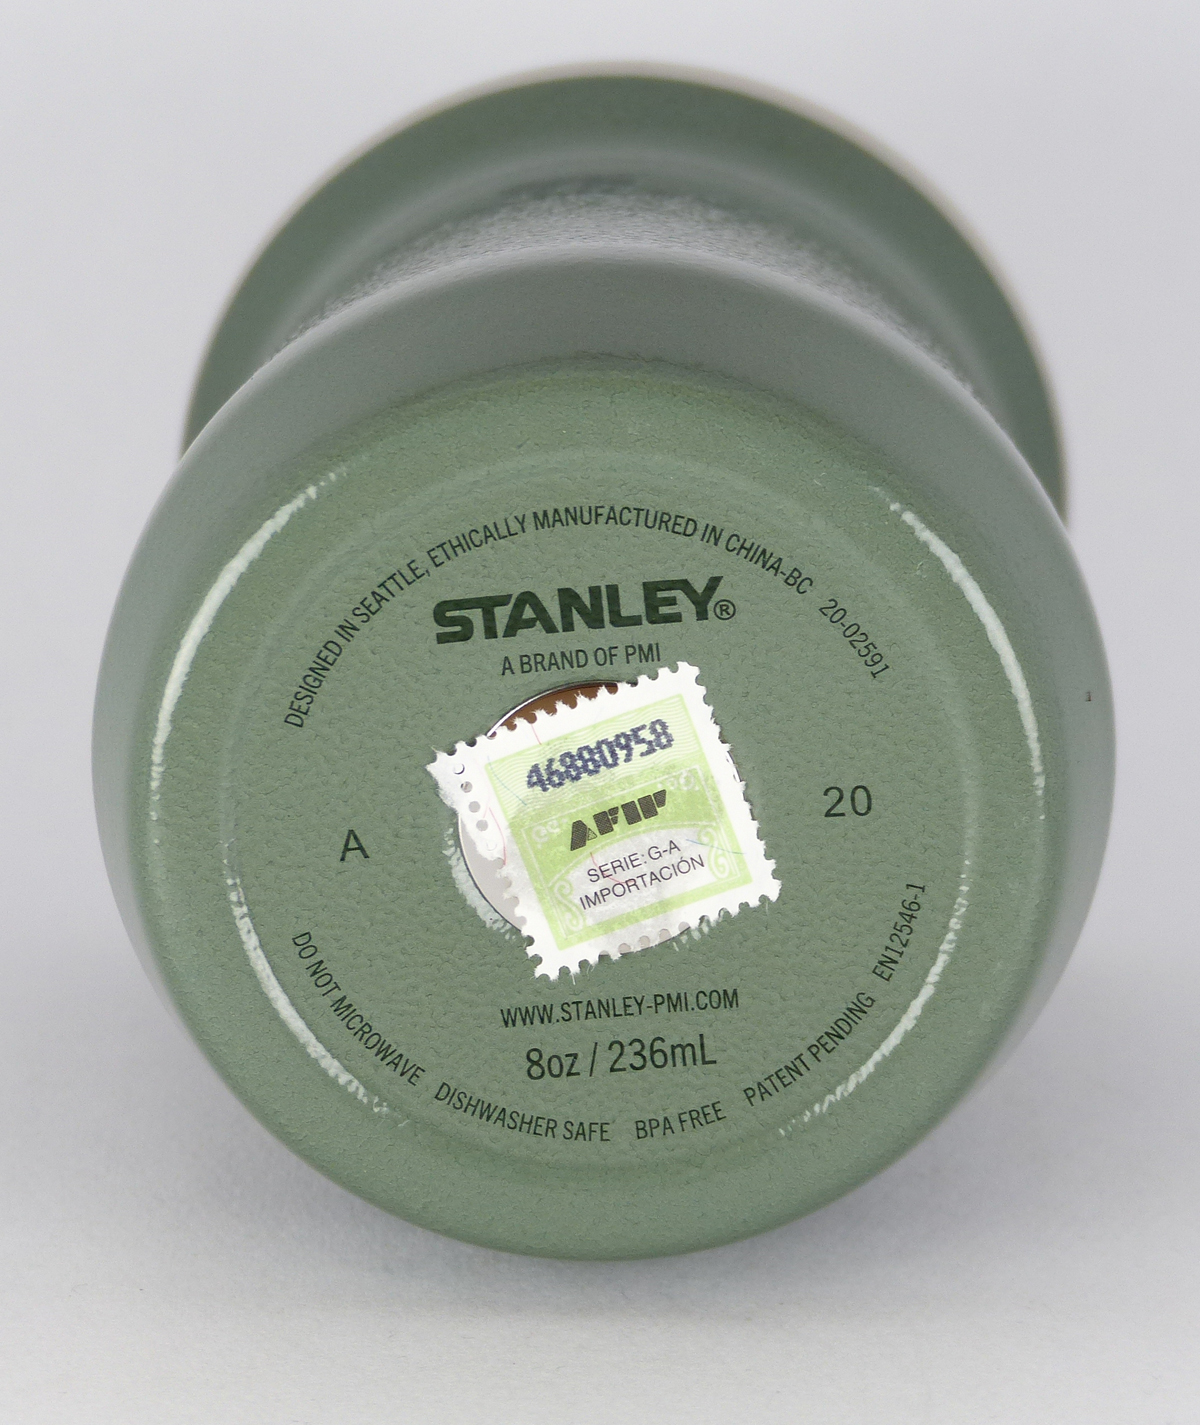 For once Argentina has exclusive best stuff 1st! Stanley System Mate 🧉  Termo : r/yerbamate